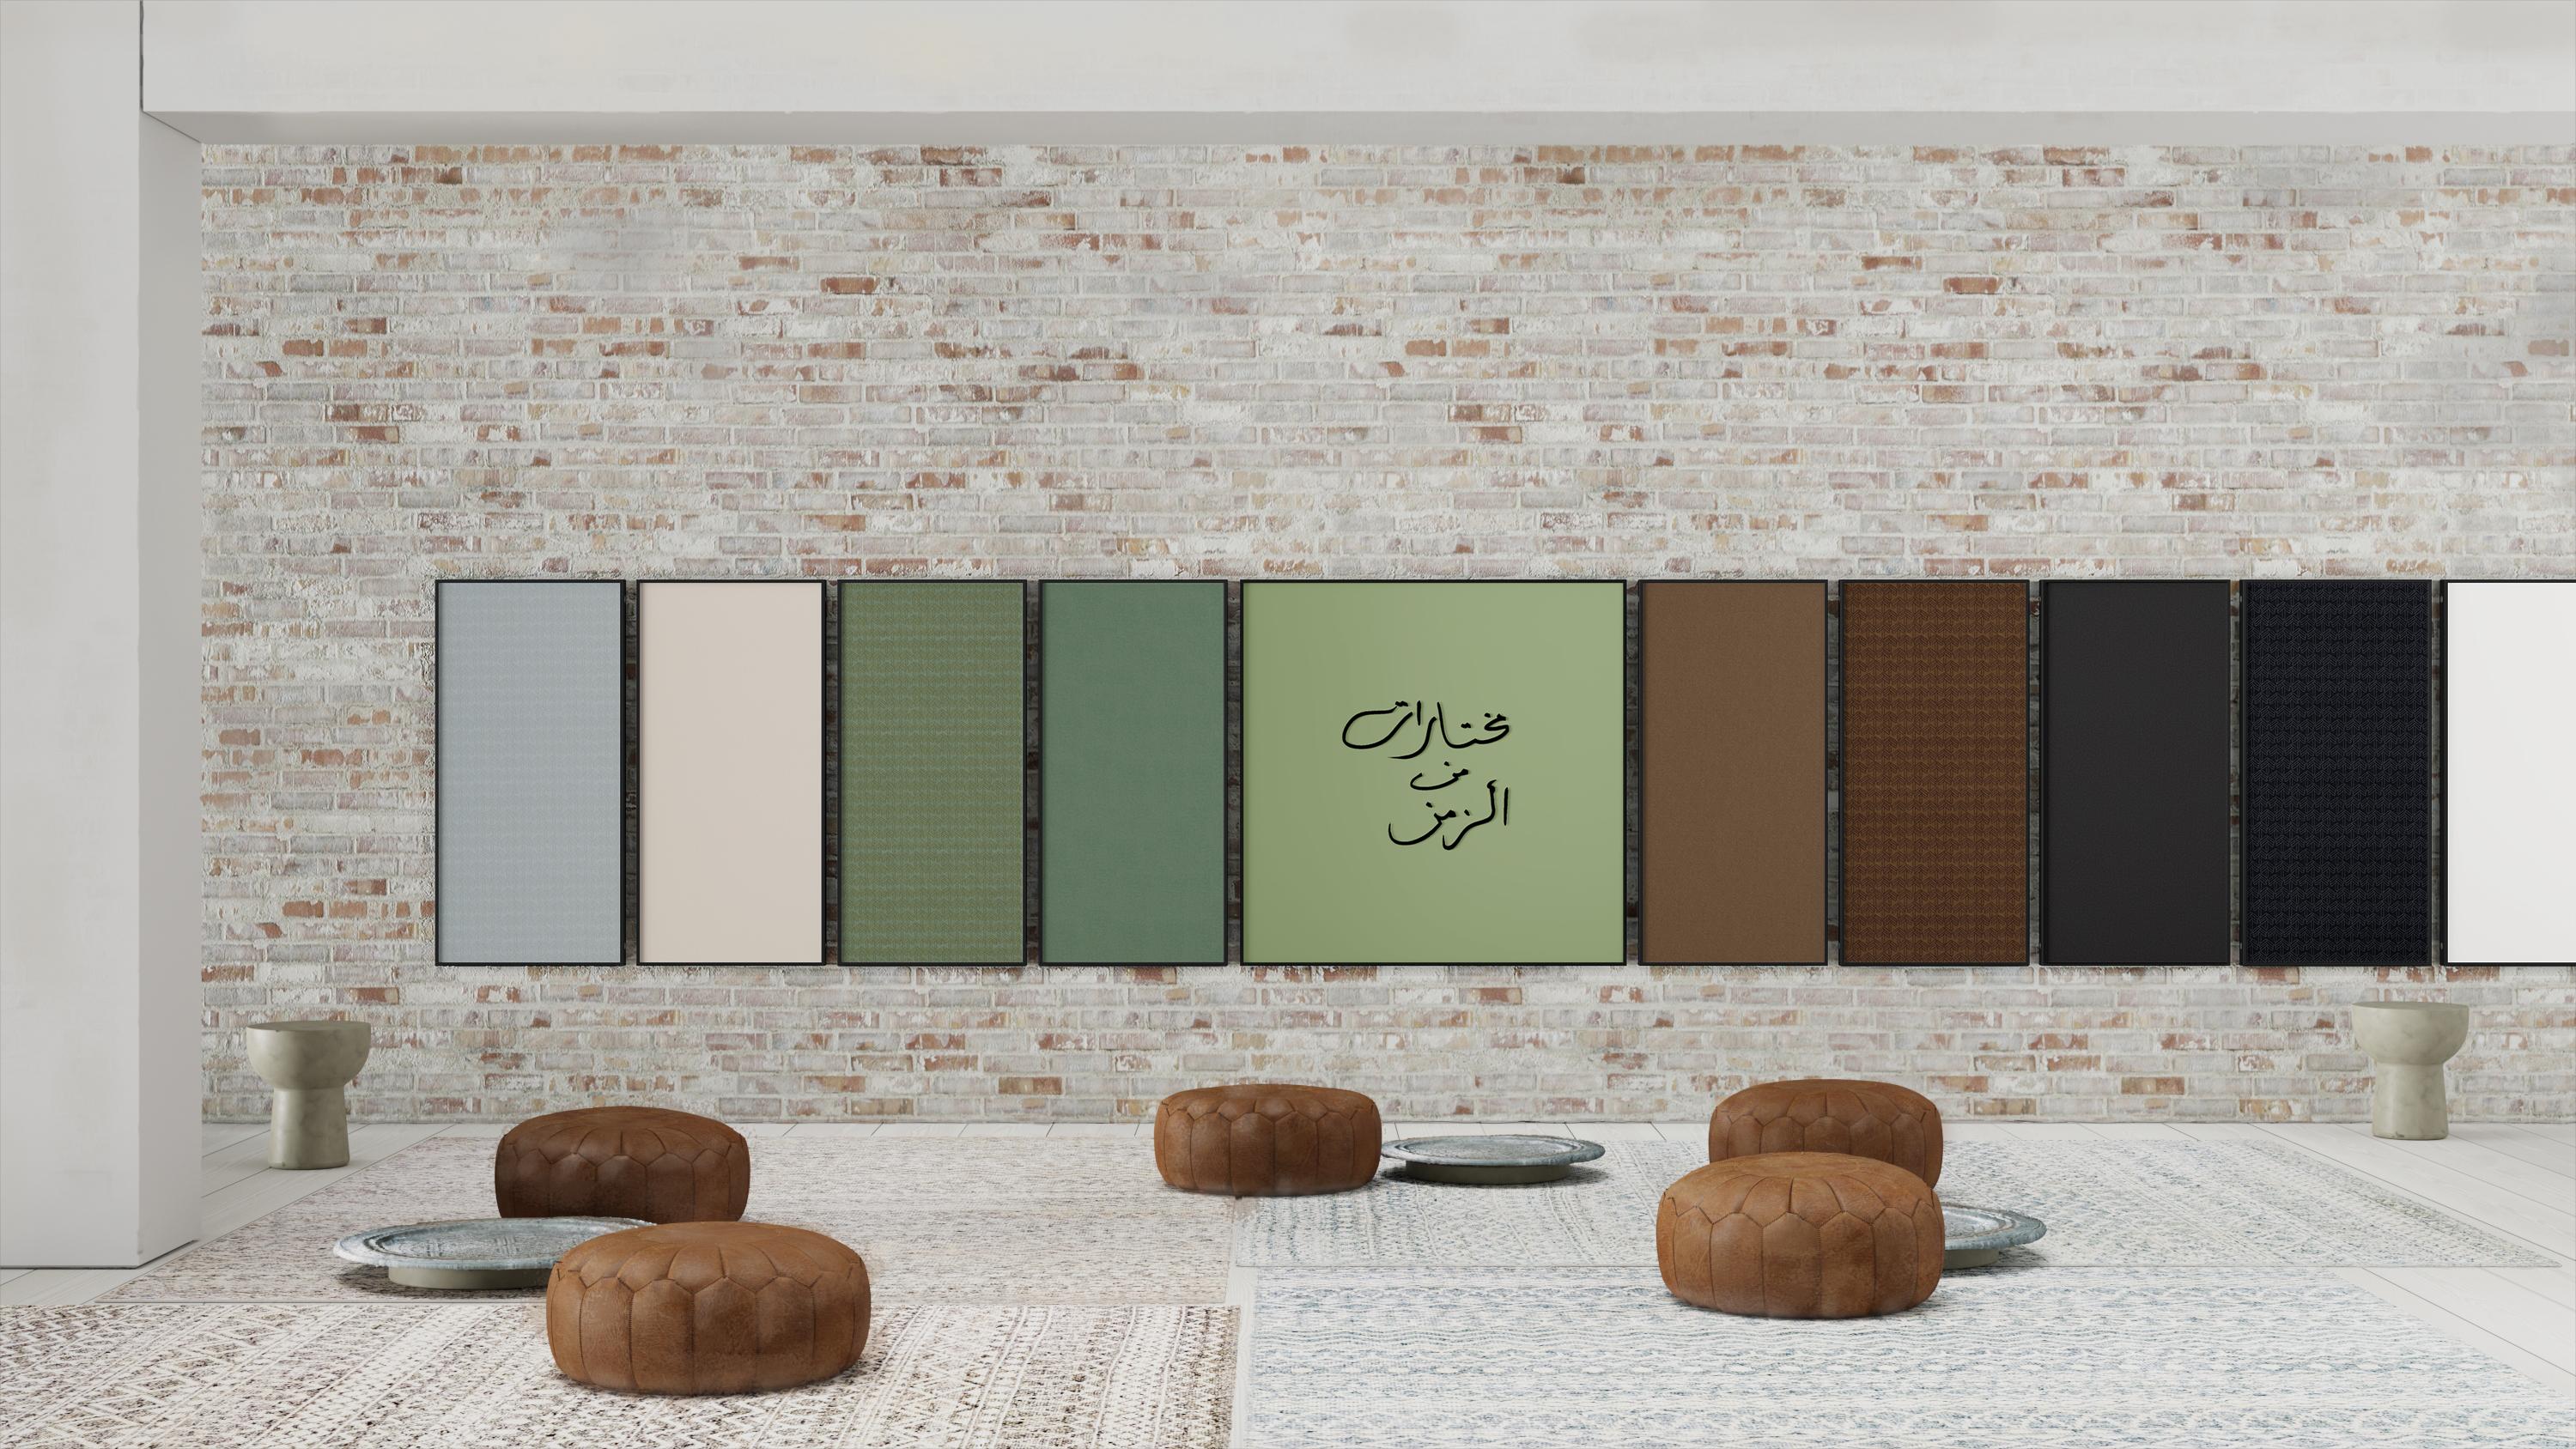 Acustica opus 2 offers a select assortment of 8 cool pastel and earth tones from designs developed by Japanese fashion designer Akira Minagawa. The collection features a mixture of patterns with embroidered nature motifs and nuanced base